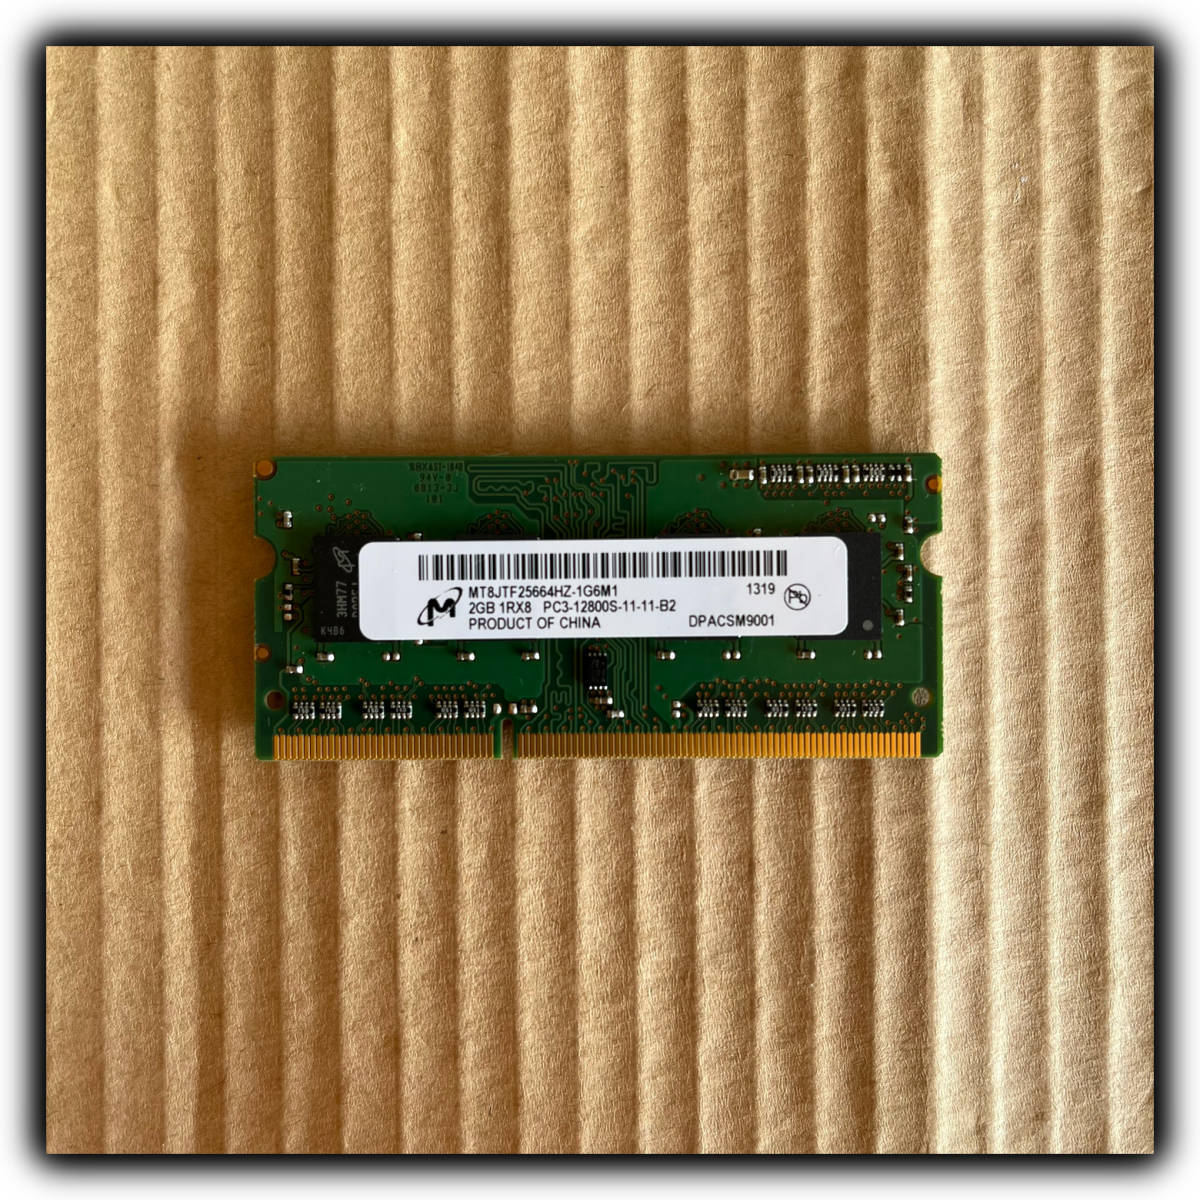 Hynix,Micron,Elpida total 8 sheets 15GB minute equipped.